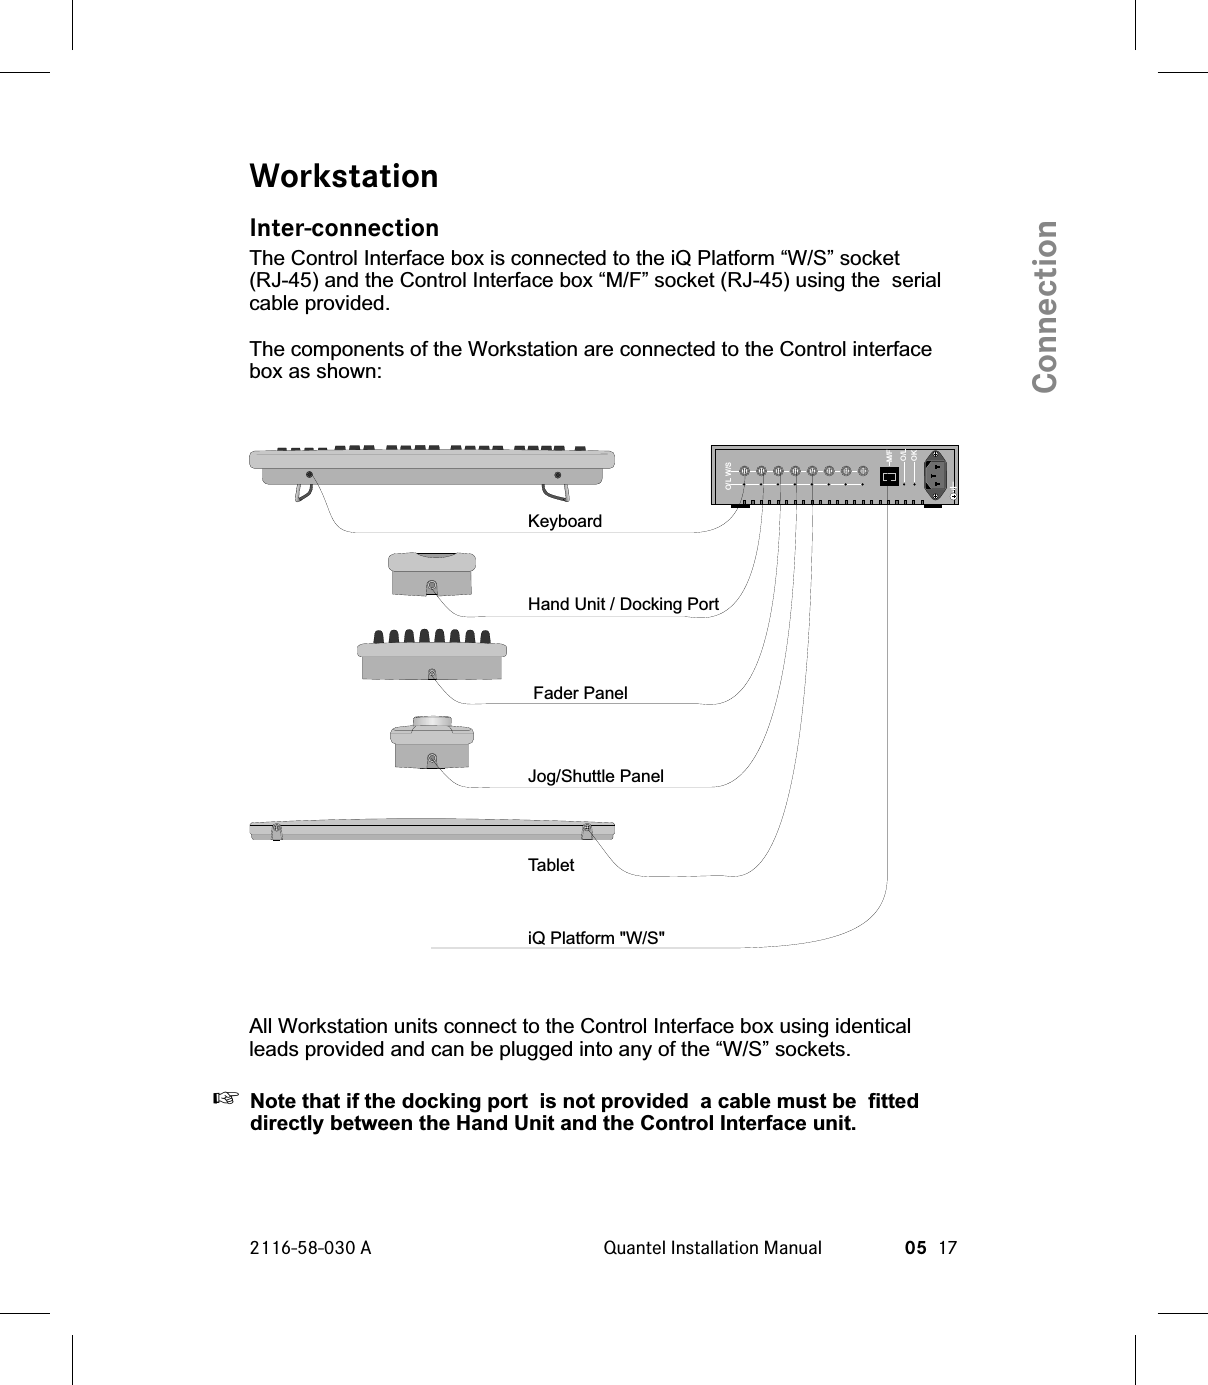 WorkstationInter-connectionThe Control Interface box is connected to the iQ Platform “W/S” socket(RJ-45) and the Control Interface box “M/F” socket (RJ-45) using the serialcable provided.The components of the Workstation are connected to the Control interfacebox as shown:All Workstation units connect to the Control Interface box using identicalleads provided and can be plugged into any of the “W/S” sockets.☞Note that if the docking port is not provided a cable must be fitteddirectly between the Hand Unit and the Control Interface unit.2116-58-030 A Quantel Installation Manual 05 17ConnectionM/FO/LOKO/L W/SKeyboardHand Unit / Docking PortFader PanelJog/Shuttle PanelTabletiQ Platform &quot;W/S&quot;